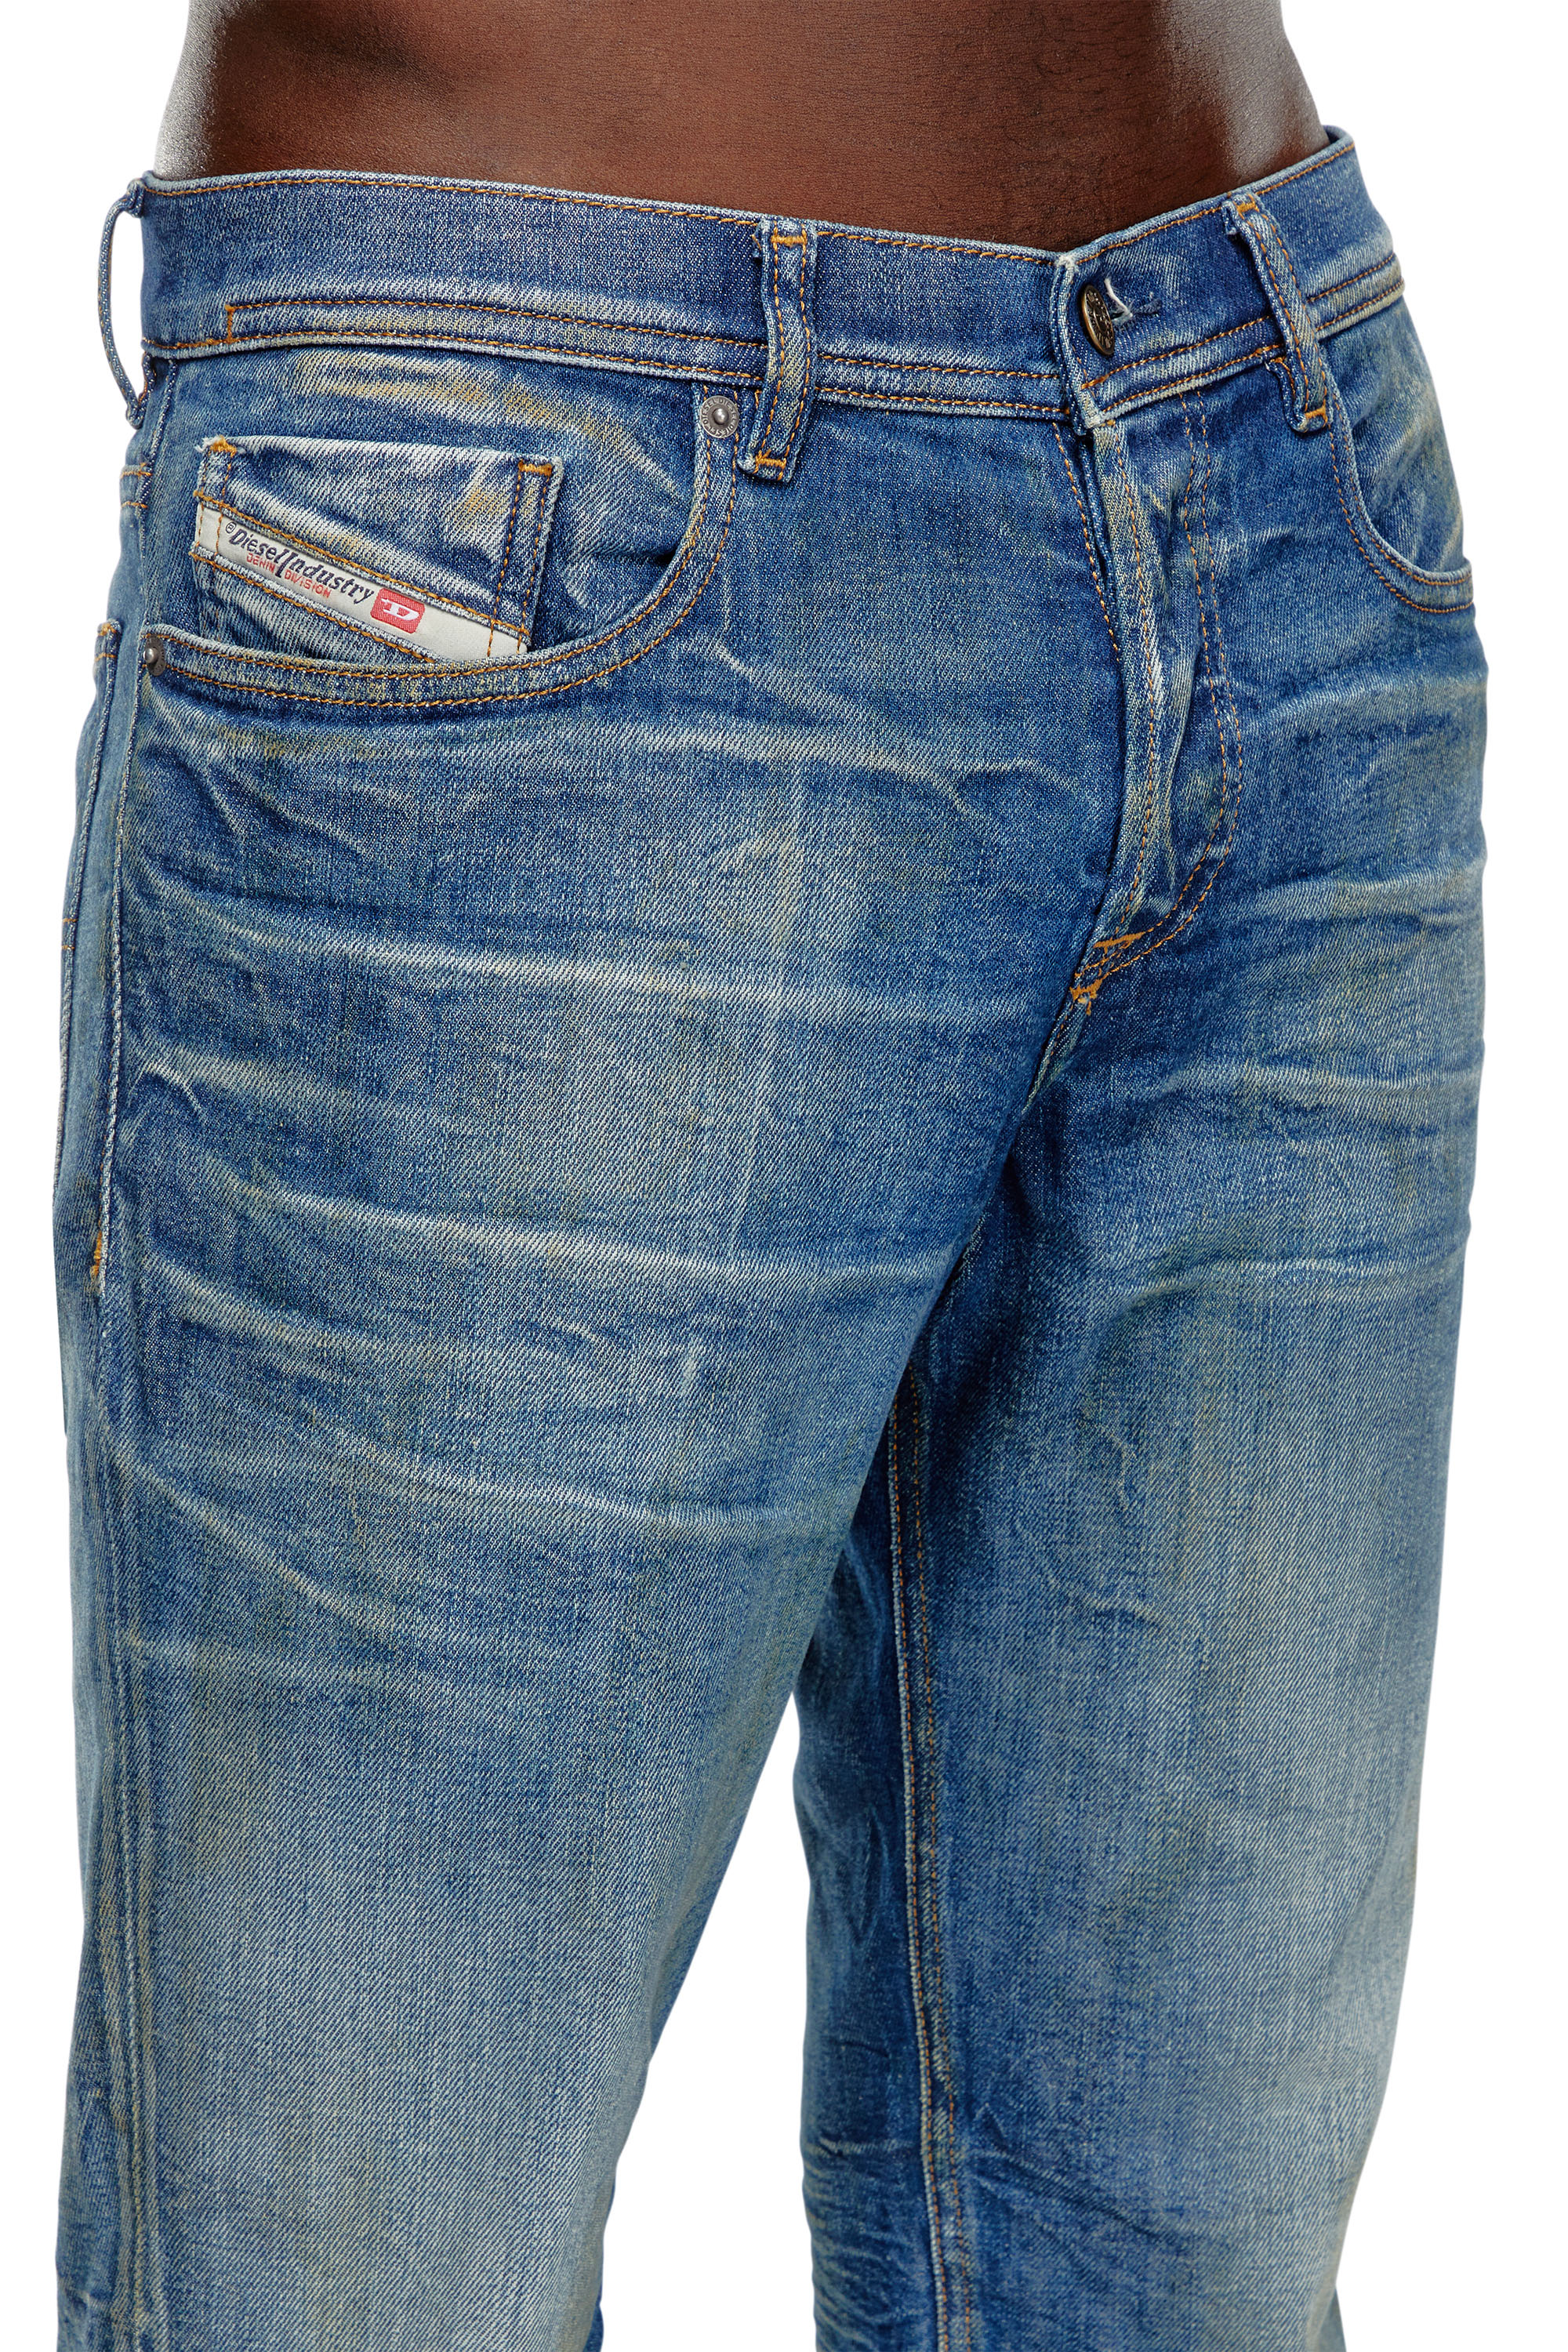 Diesel - Tapered Jeans 2023 D-Finitive 09J66, Hombre Tapered Jeans - 2023 D-Finitive in Azul marino - Image 5